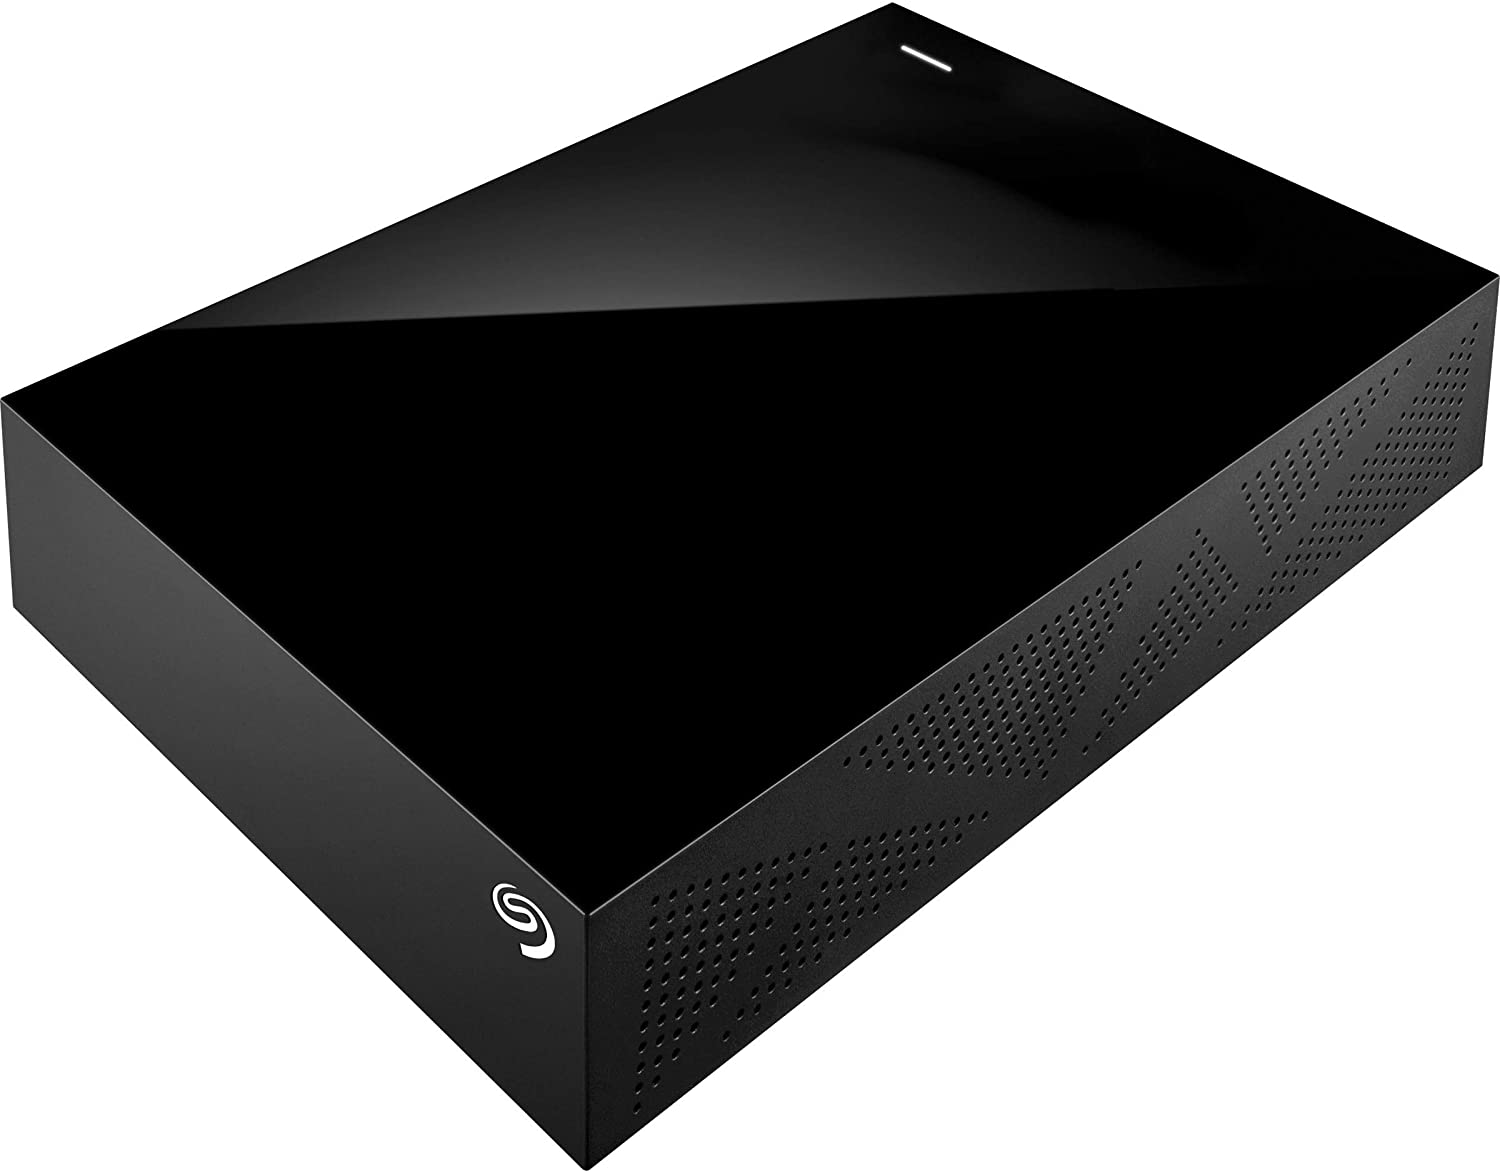 Seagate 8TB HDD Drops to Just A Little Over $150 USD on Amazon: Less than $20 Per TB?